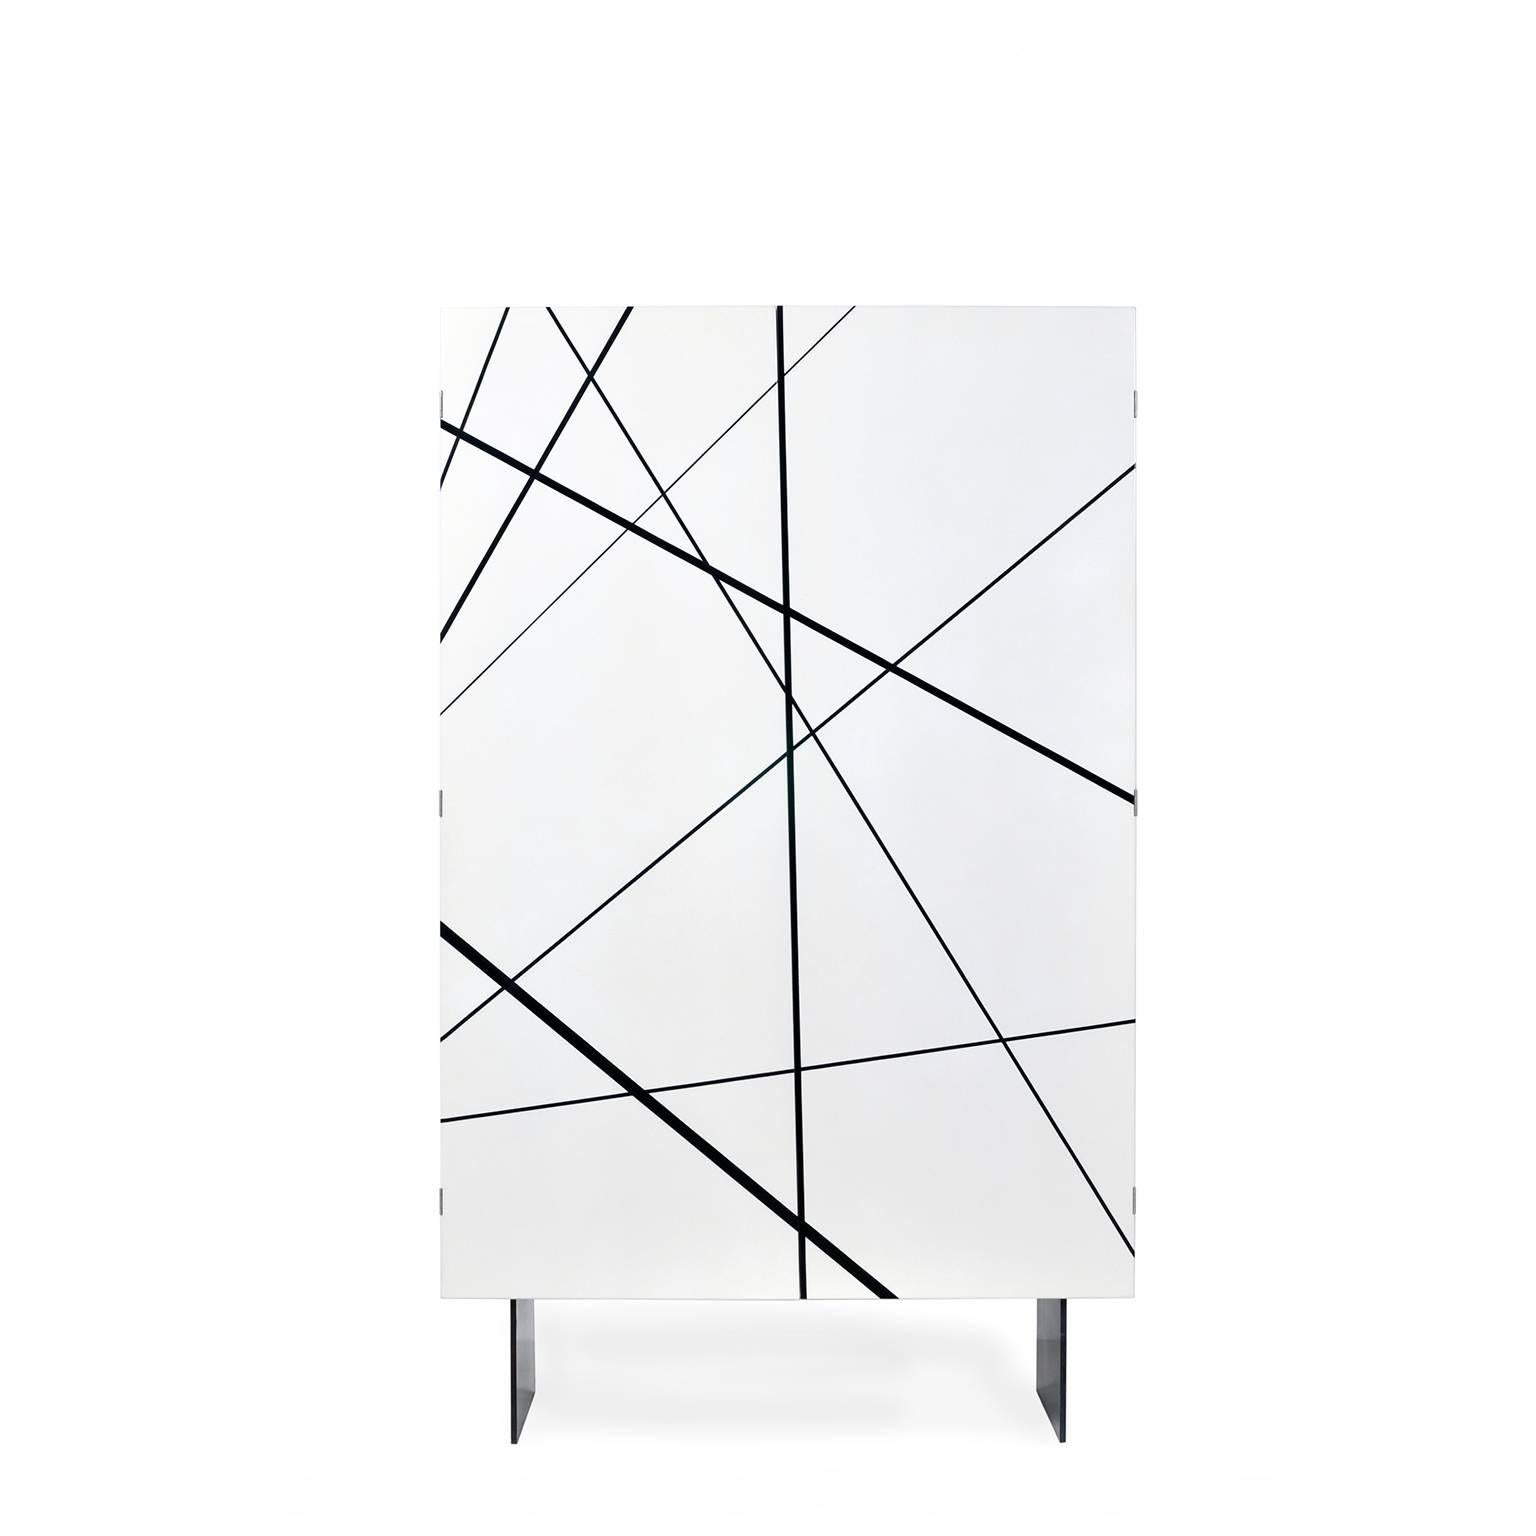 The ray cabinet in gloss white lacquer and Ebony inlay is a stunning artistic nod to modern and contemporary craft and design.

The graphic black-on-white surface seems simple enough from a distance, but upon closer examination, one discovers that